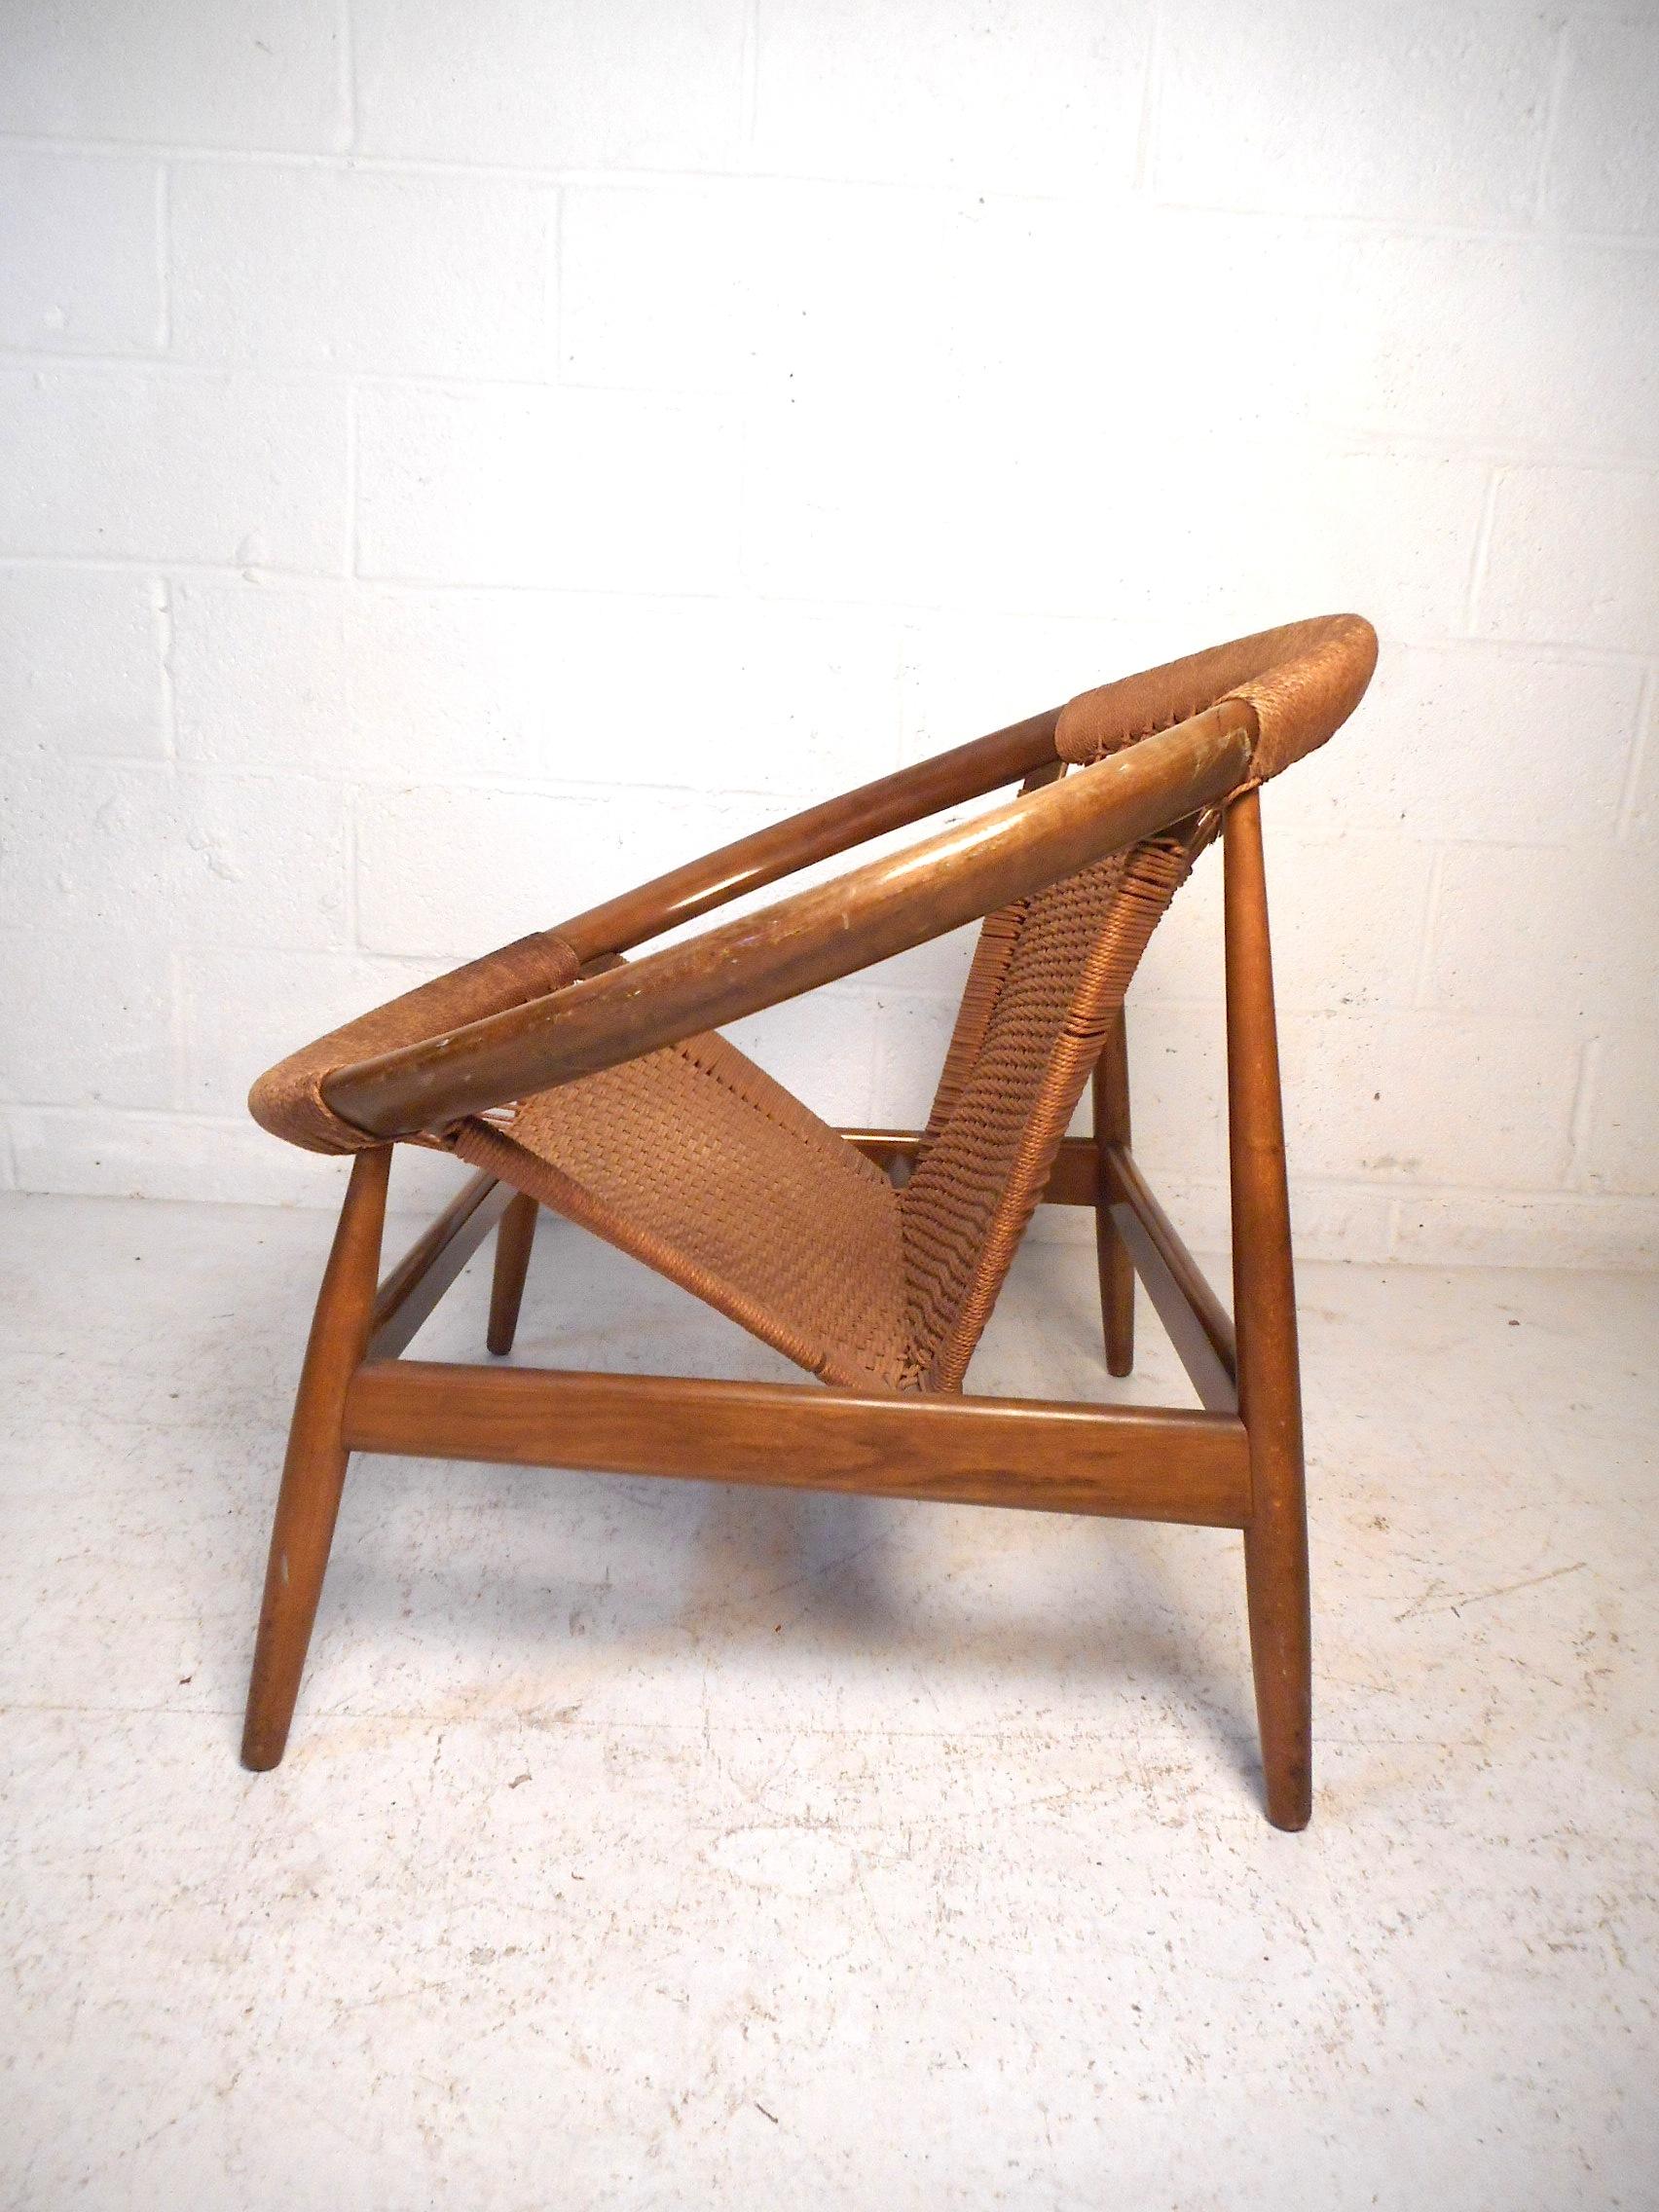 This unique Danish modern hoop chair features a sturdy teak construction, a sleek angular frame which gives the piece an interesting visual profile, and stylishly comfortable woven cord seating. Made in Denmark, circa 1950s. A very unusual and